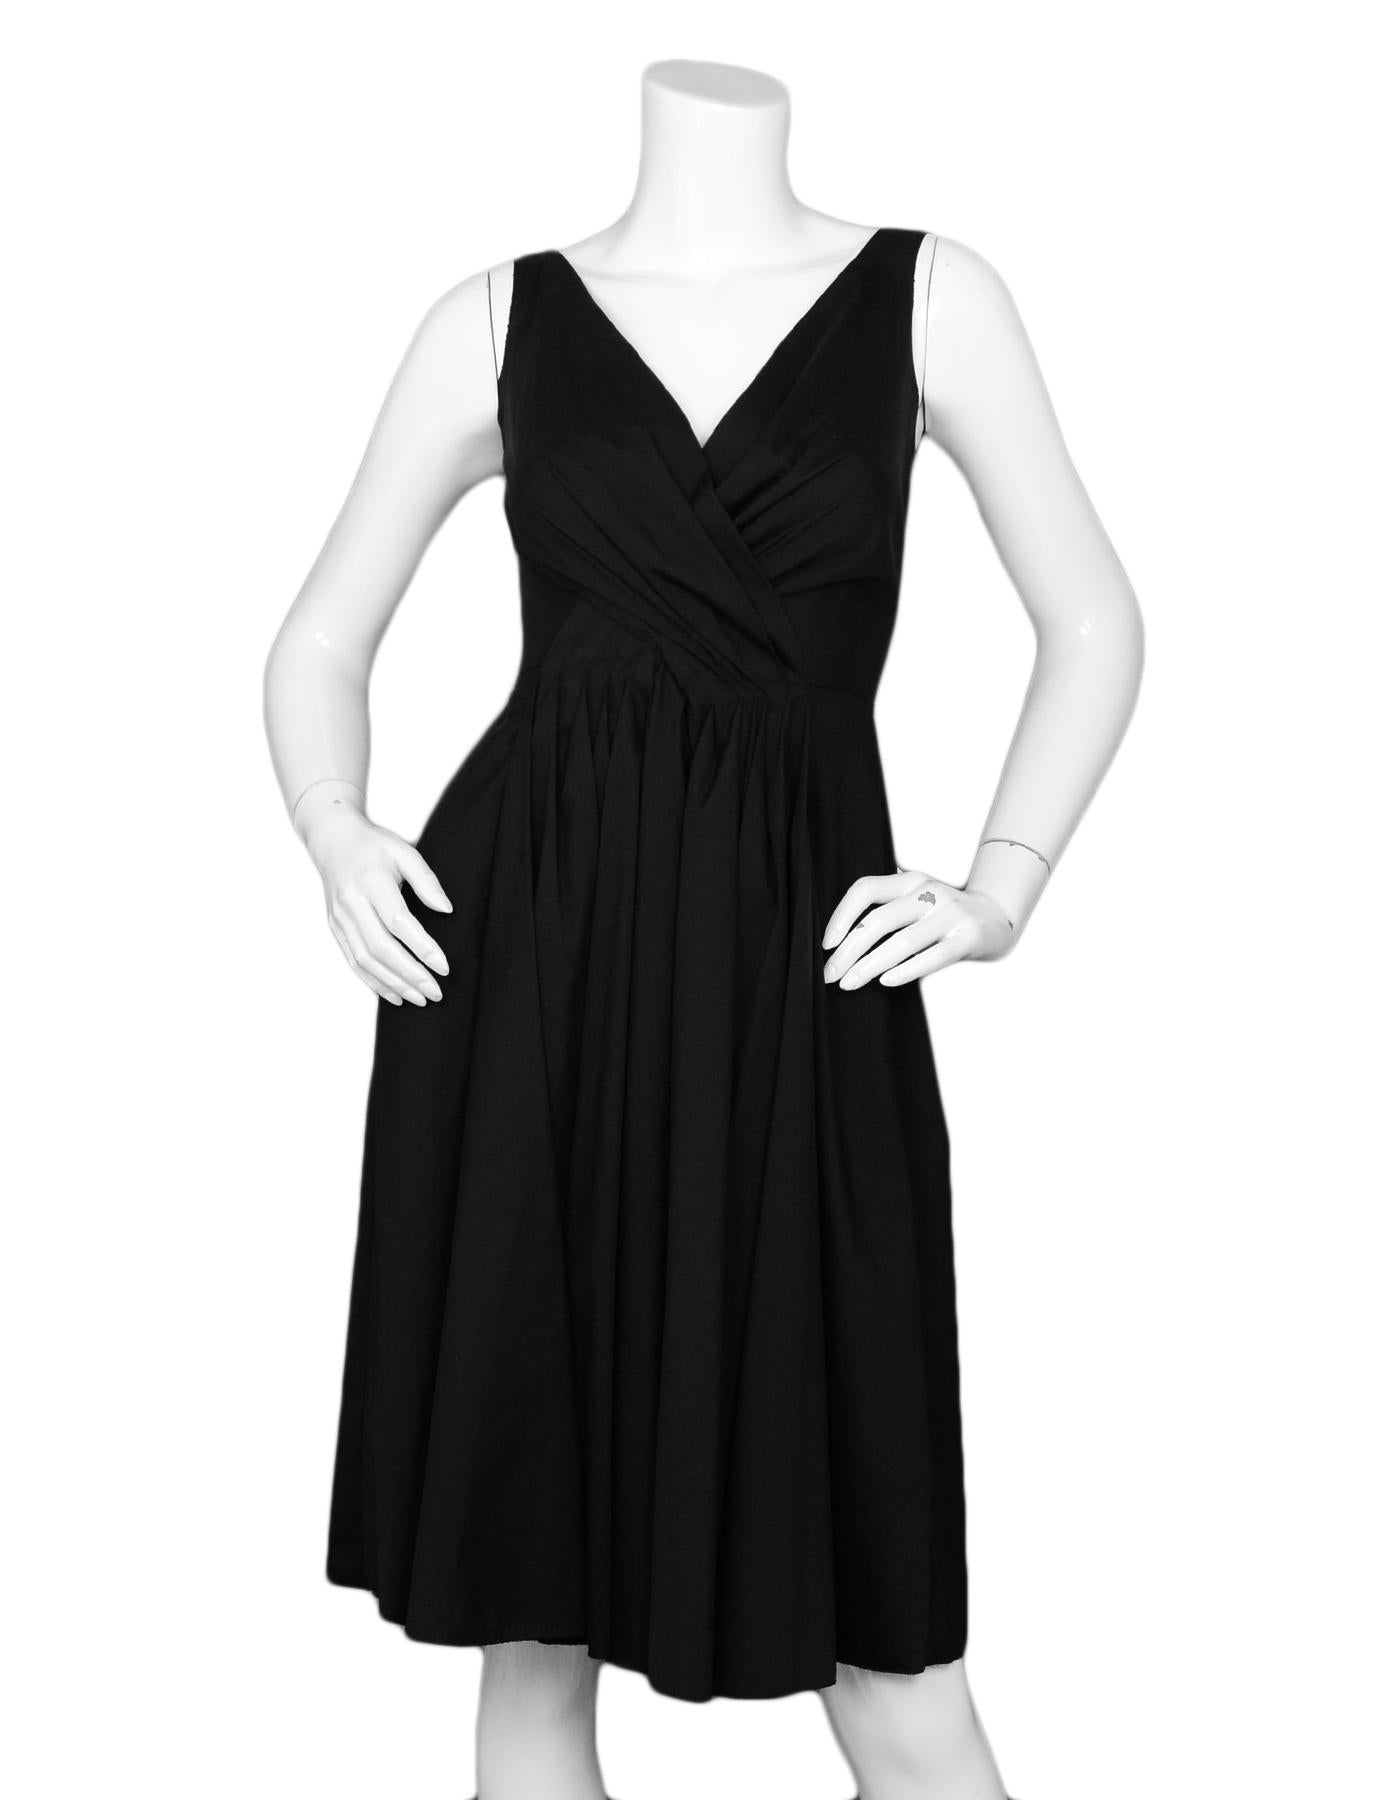 Prada Black Sleeveless Pleated Dress sz IT 38

Made In: Italy
Color: Black
Materials: Cotton, nylon
Lining: Cotton, nylon
Opening/Closure: Back zipper
Overall Condition: Excellent pre-owned condition 

Tag Size: Italy 38 (USA S) *Please refer to